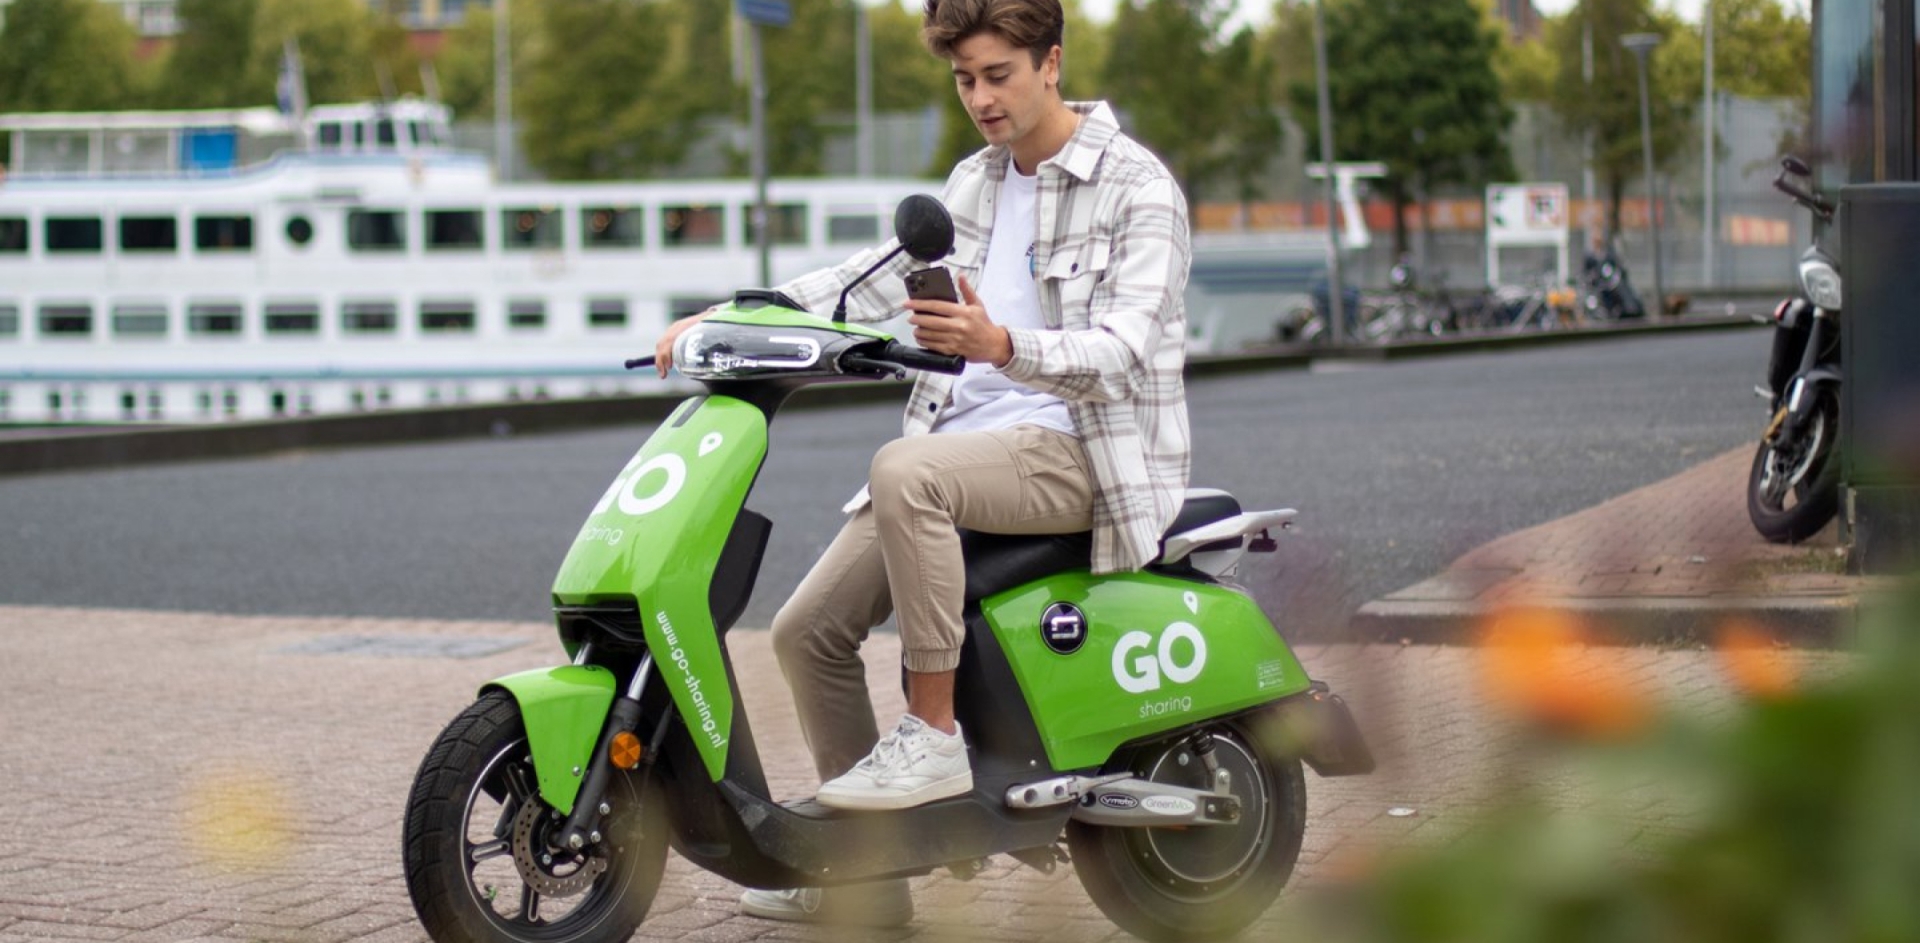 A man on a parked GO Sharing scooter. He is looking at his mobile phone.